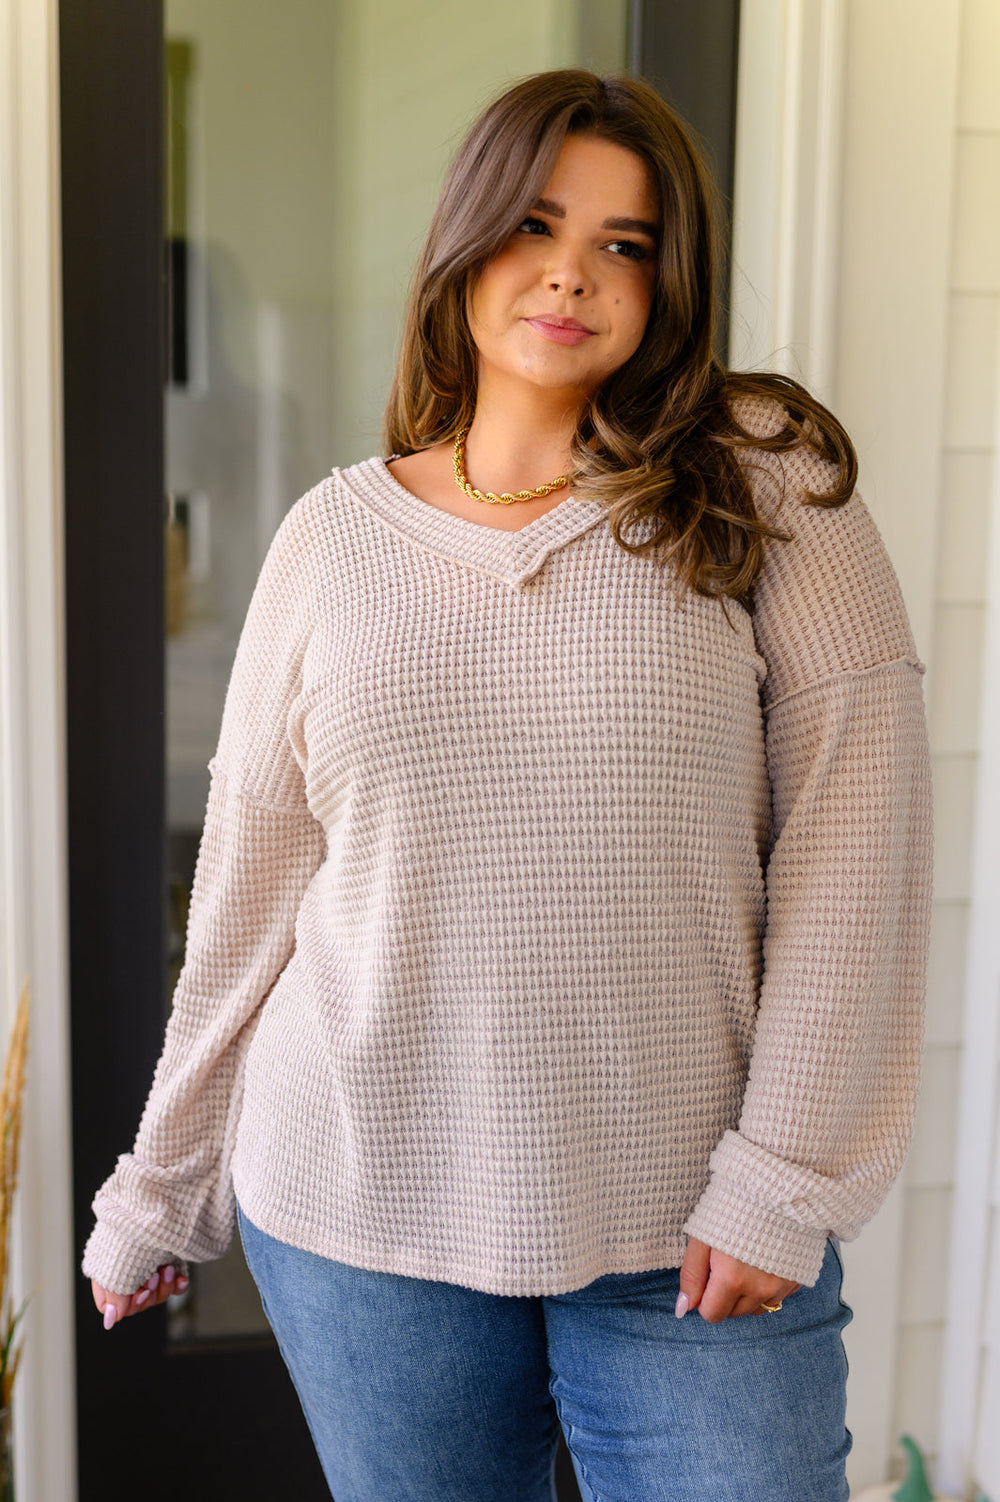 Calm In The Chaos V-Neck Sweater-Sweaters/Sweatshirts-Inspired by Justeen-Women's Clothing Boutique in Chicago, Illinois